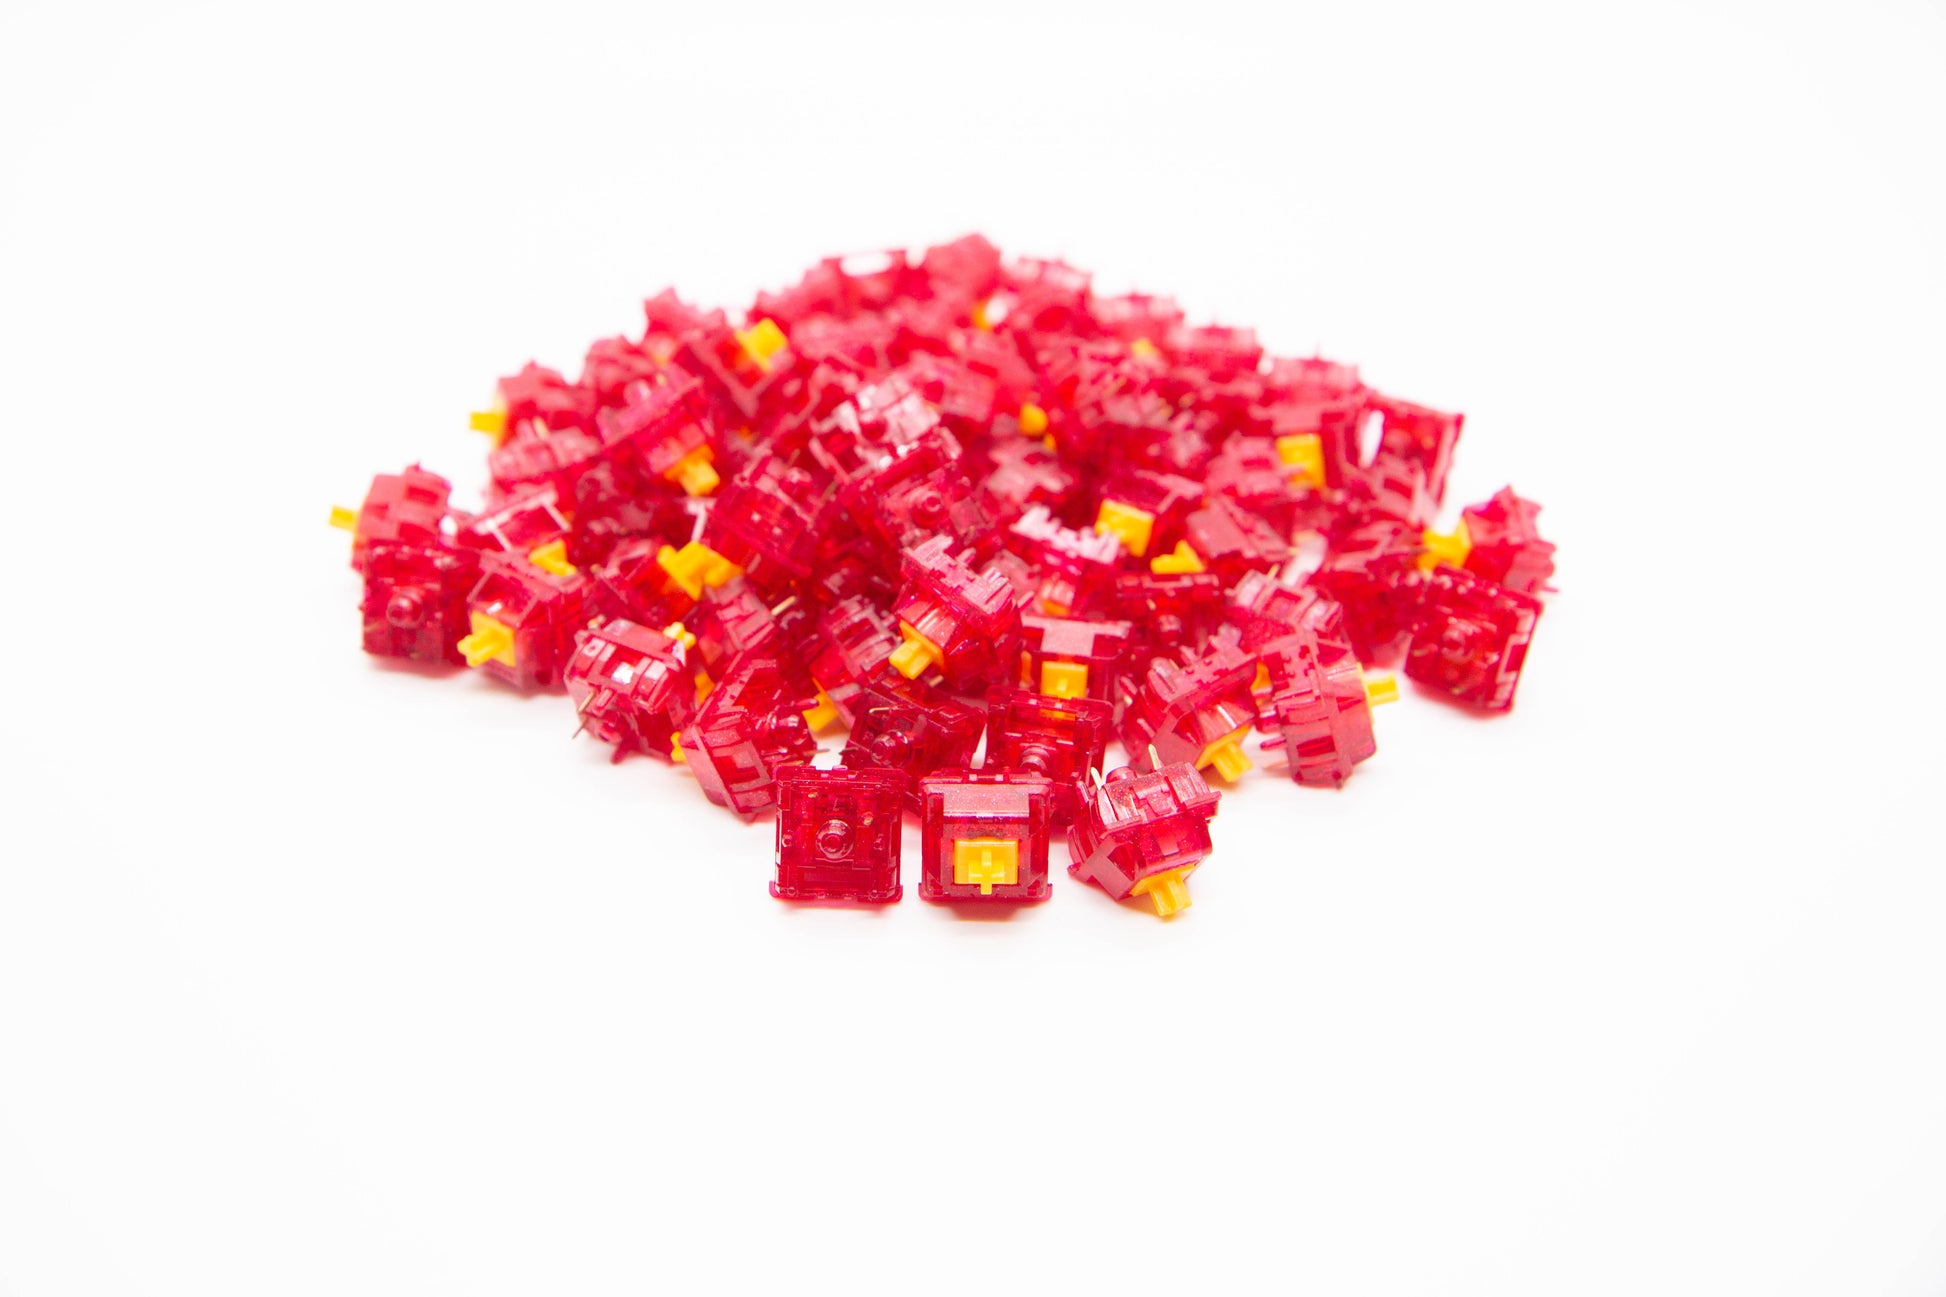 Close-up shot of a pile of Tecsee Ruby mechanical keyboard switches featuring bright red transparent housing and yellow stems